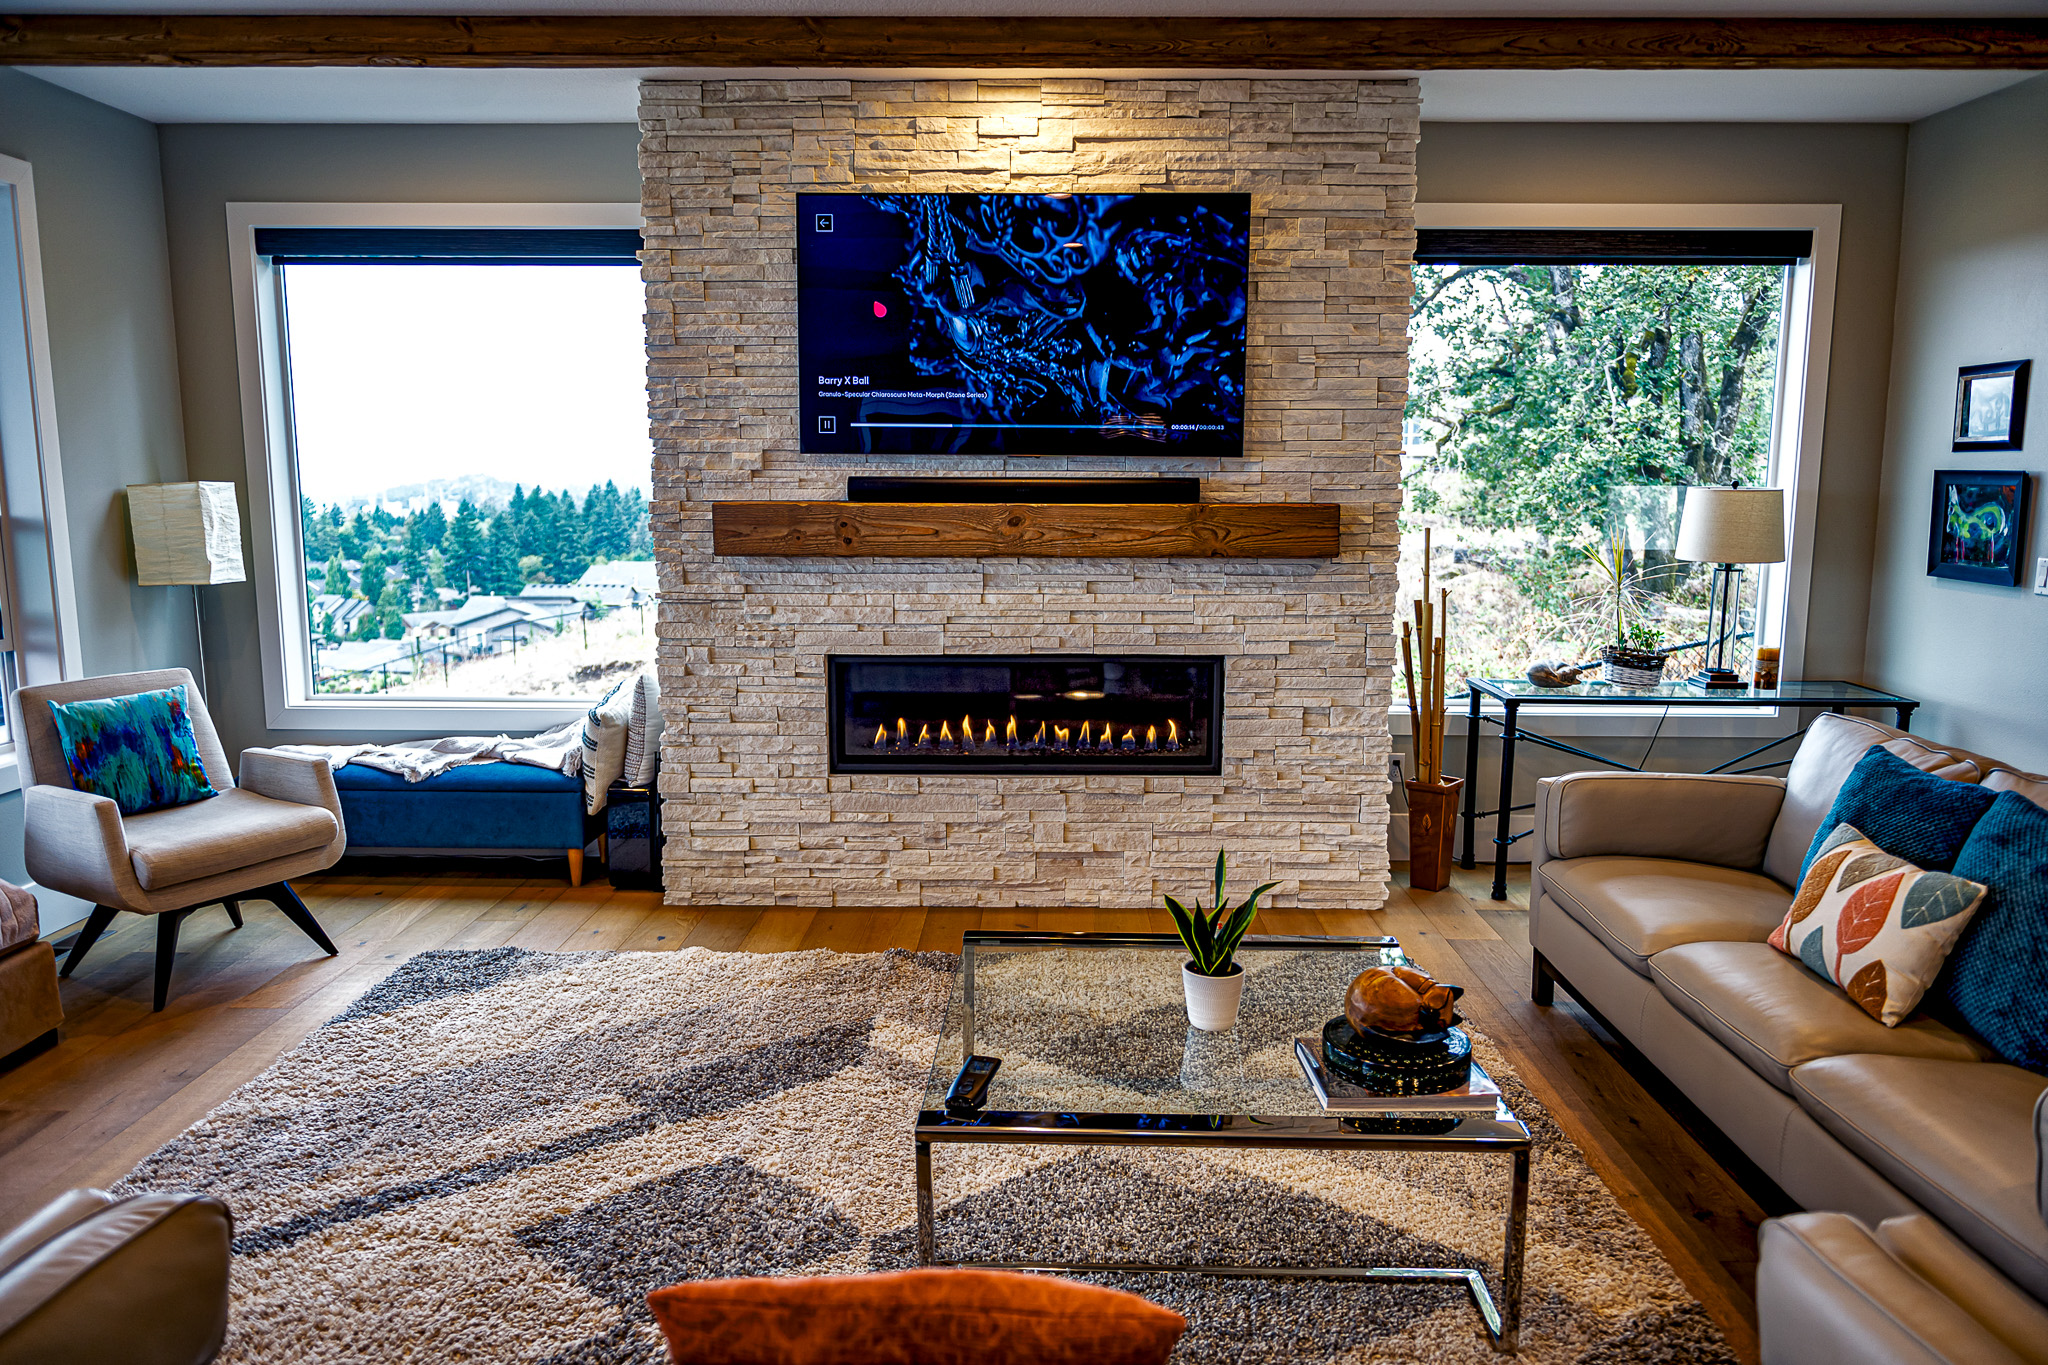 White ledgestone from Cultured Stone faces a modern indoor fireplace